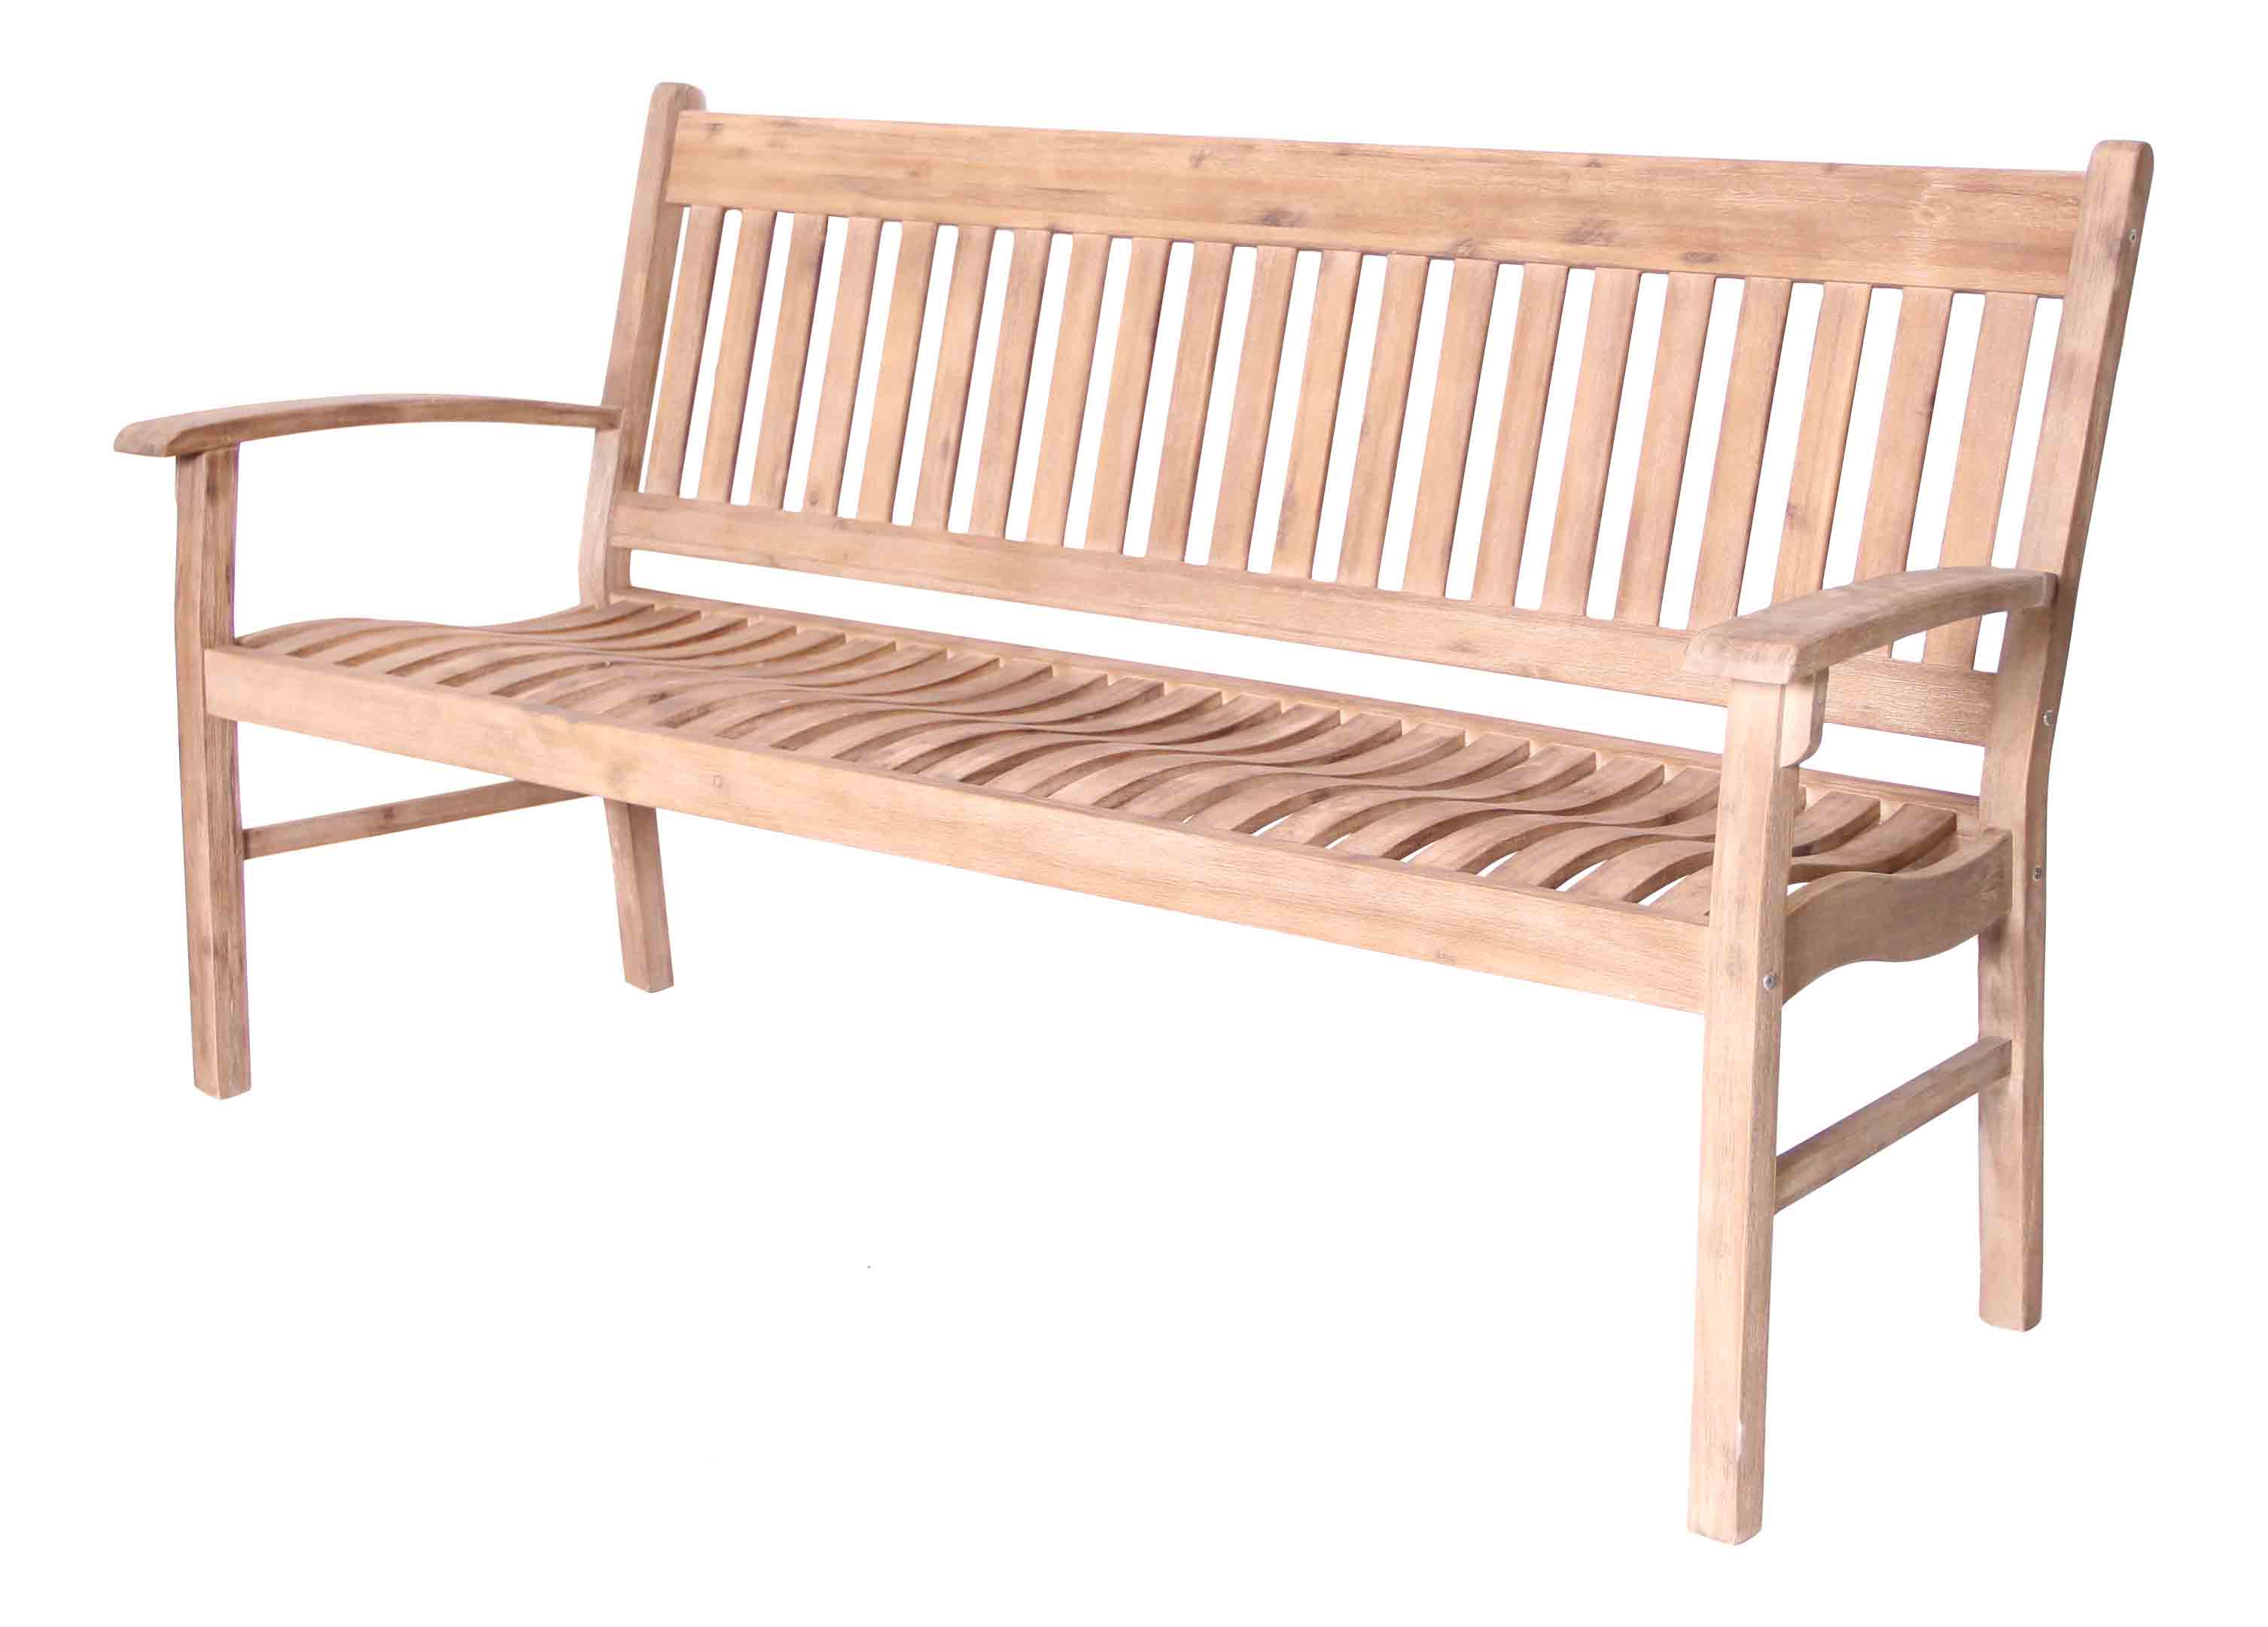 LG Outdoor Hanoi 3 Seat Slatted Bench Natural